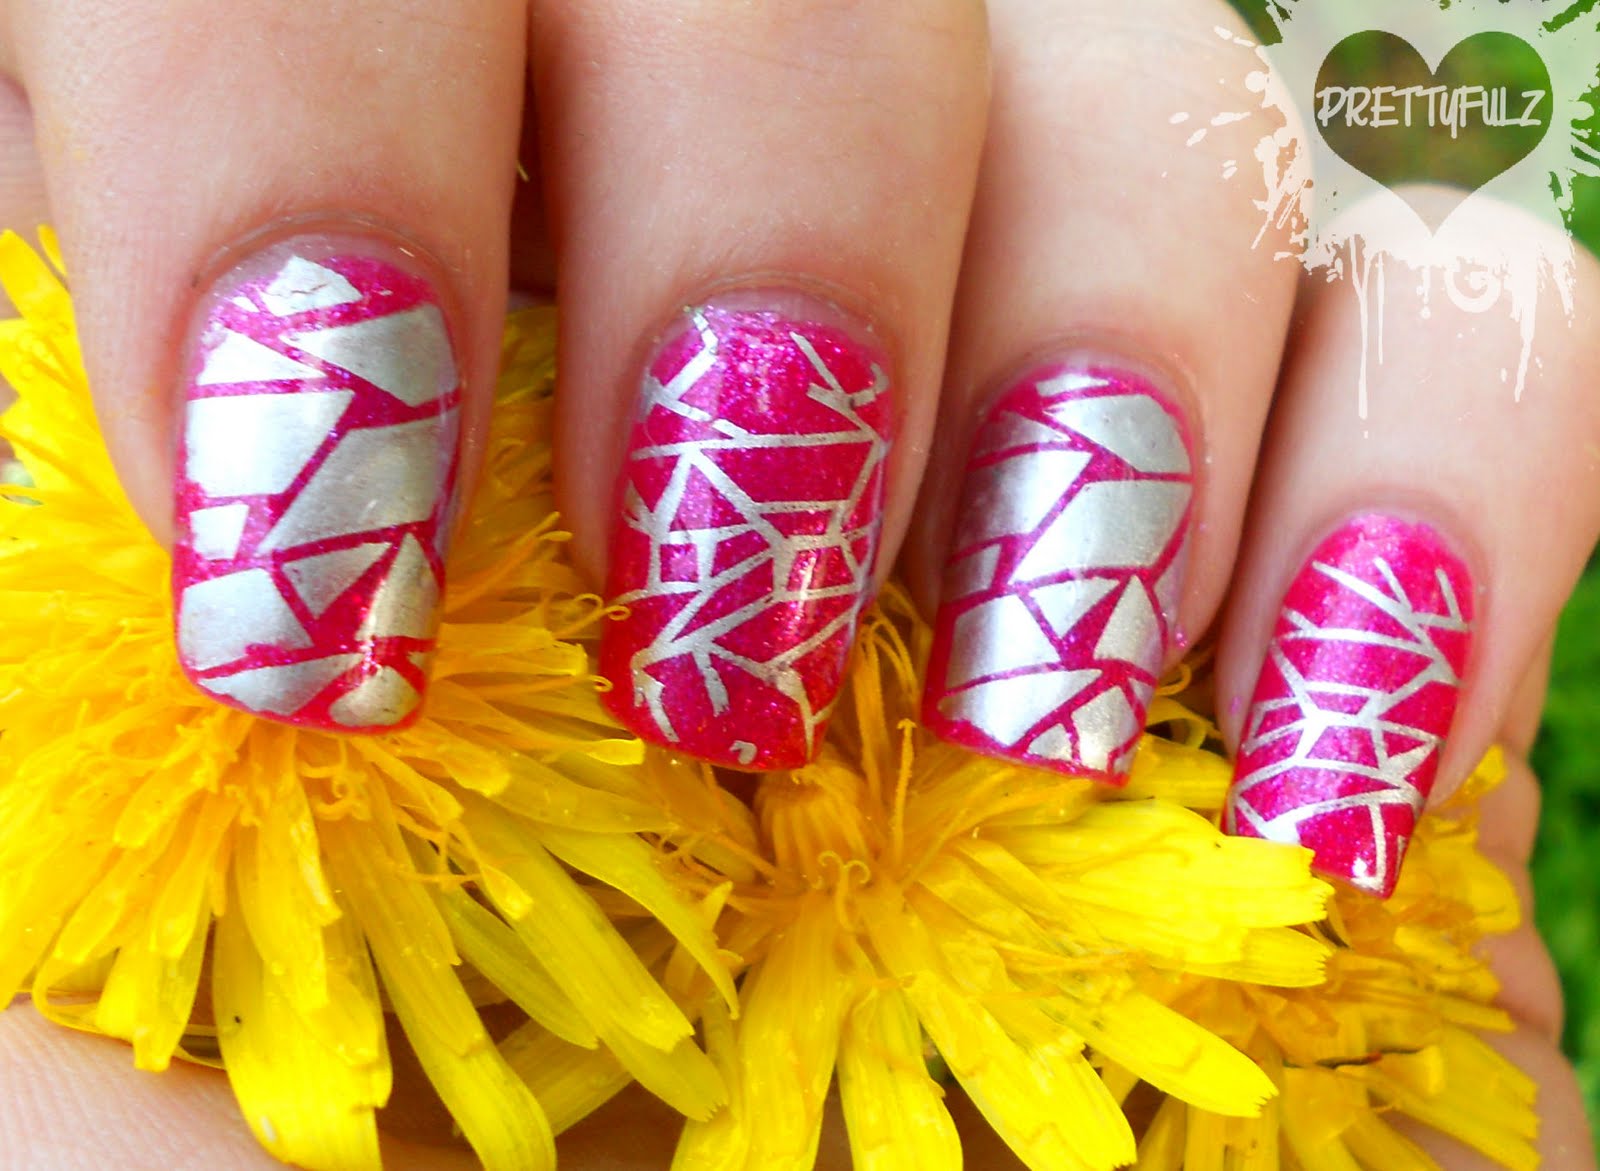 10. Pink and Silver Abstract Nail Art - wide 4